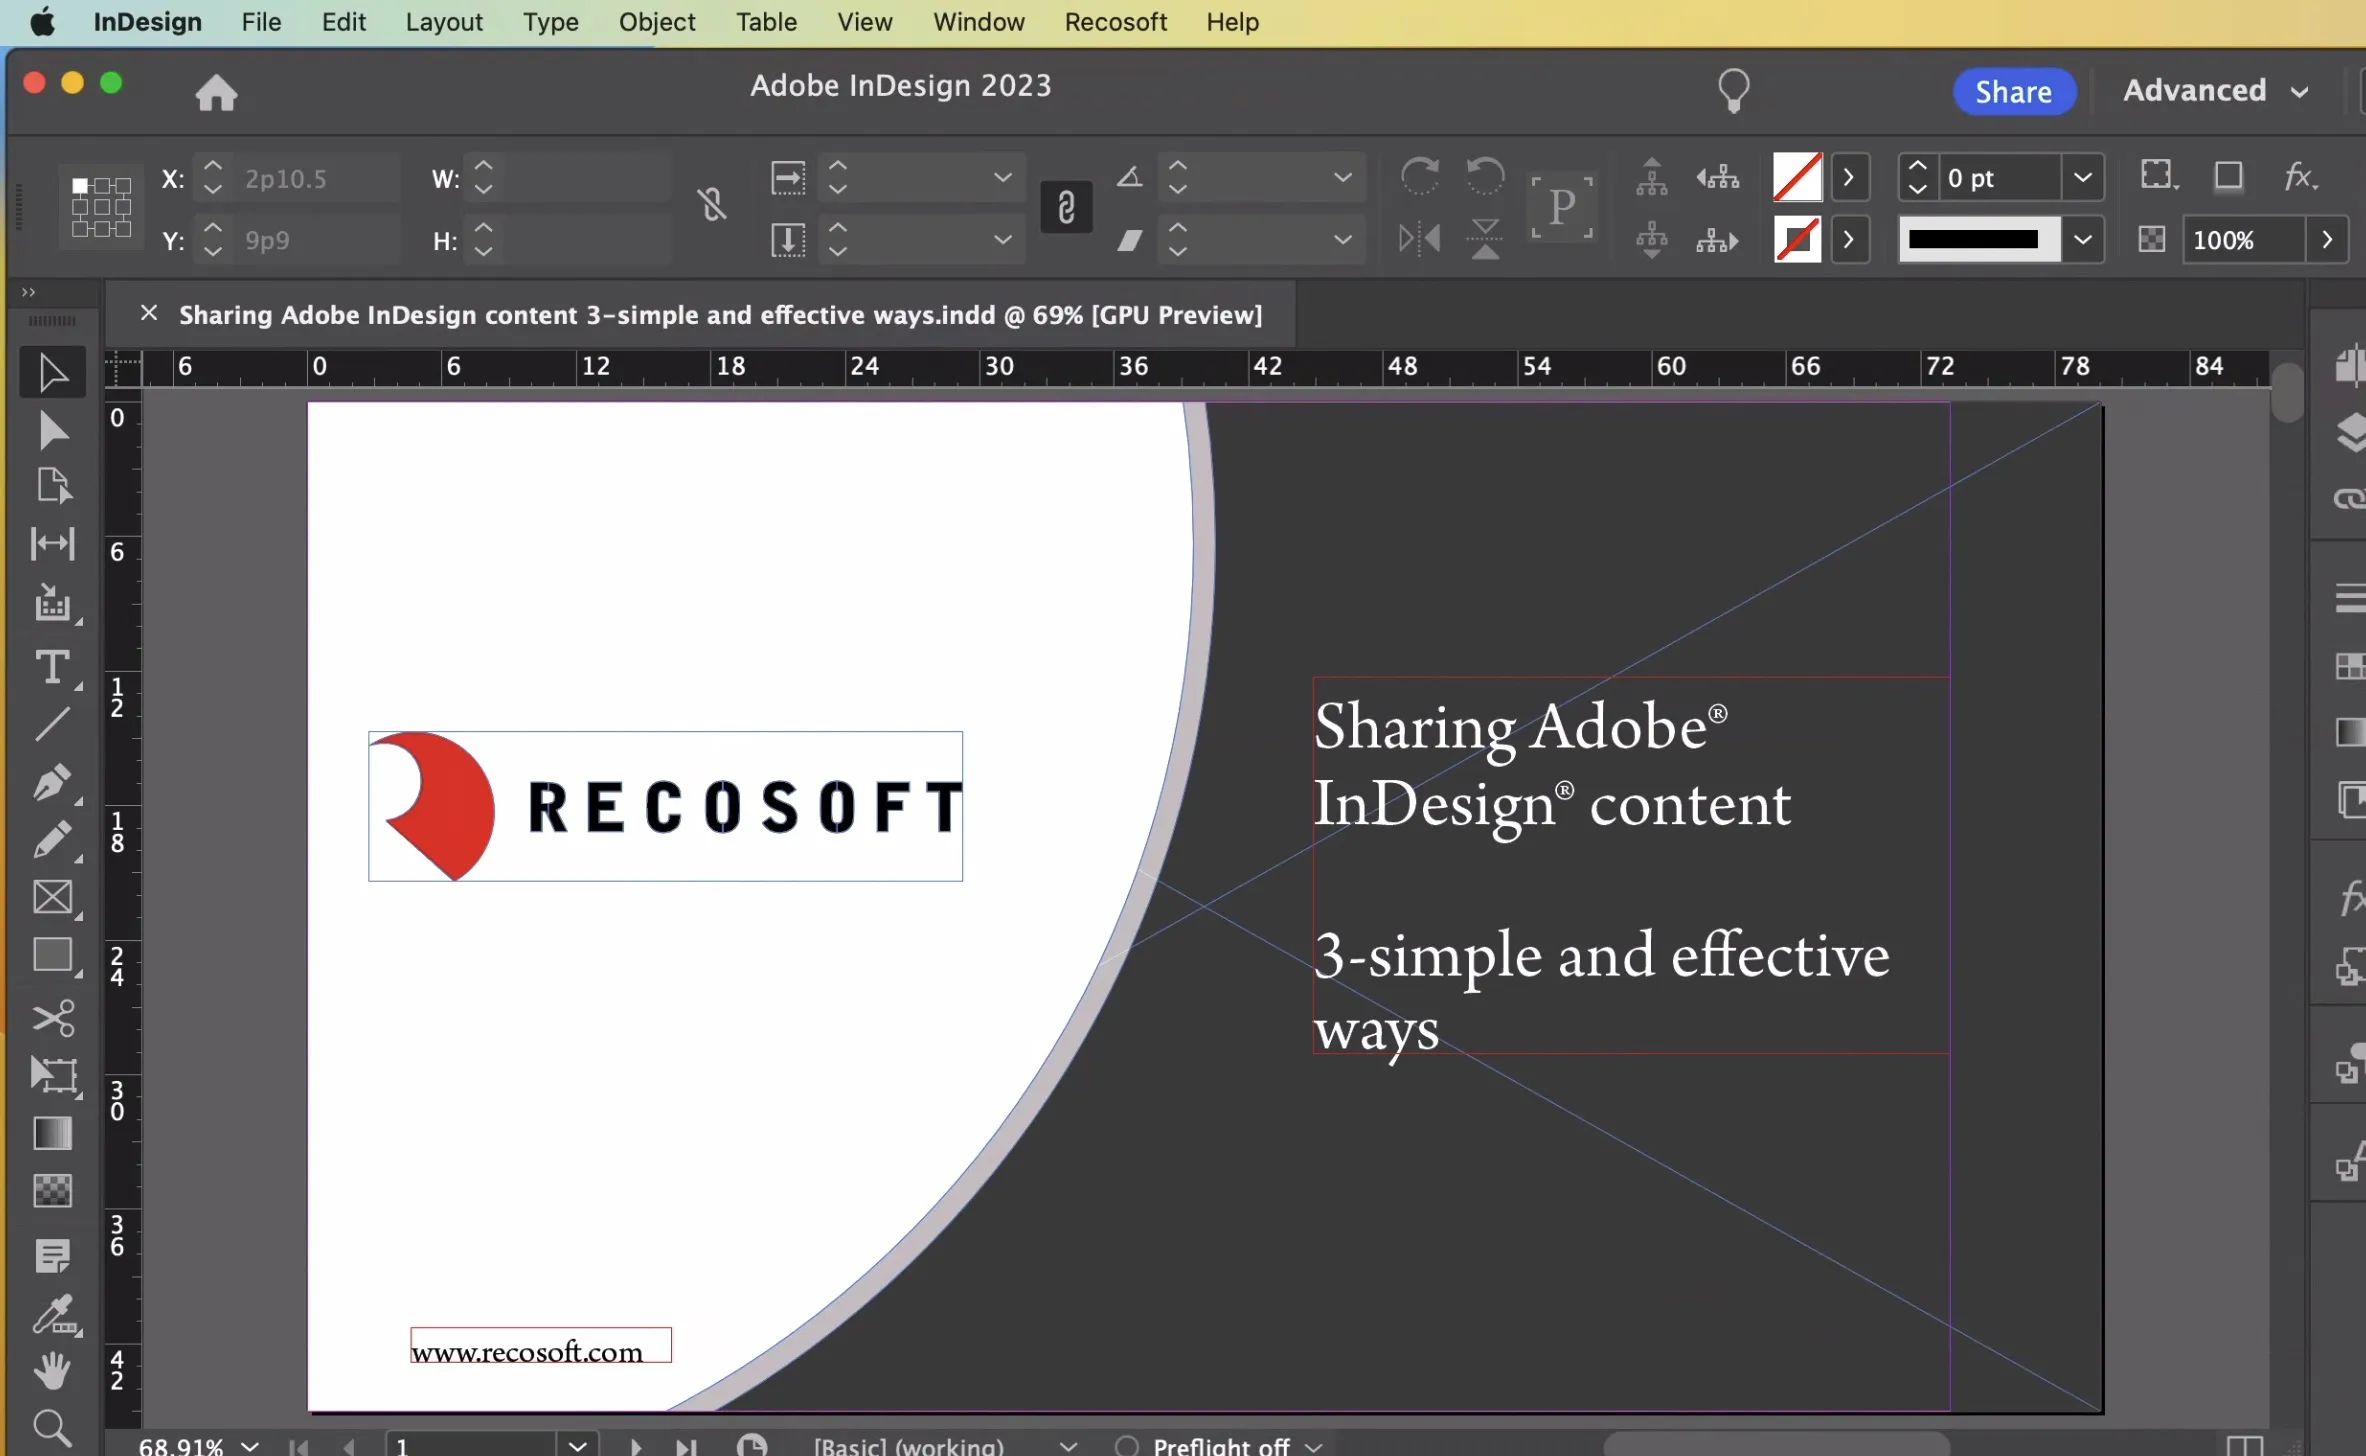 Editing a PDF in InDesign is possible.